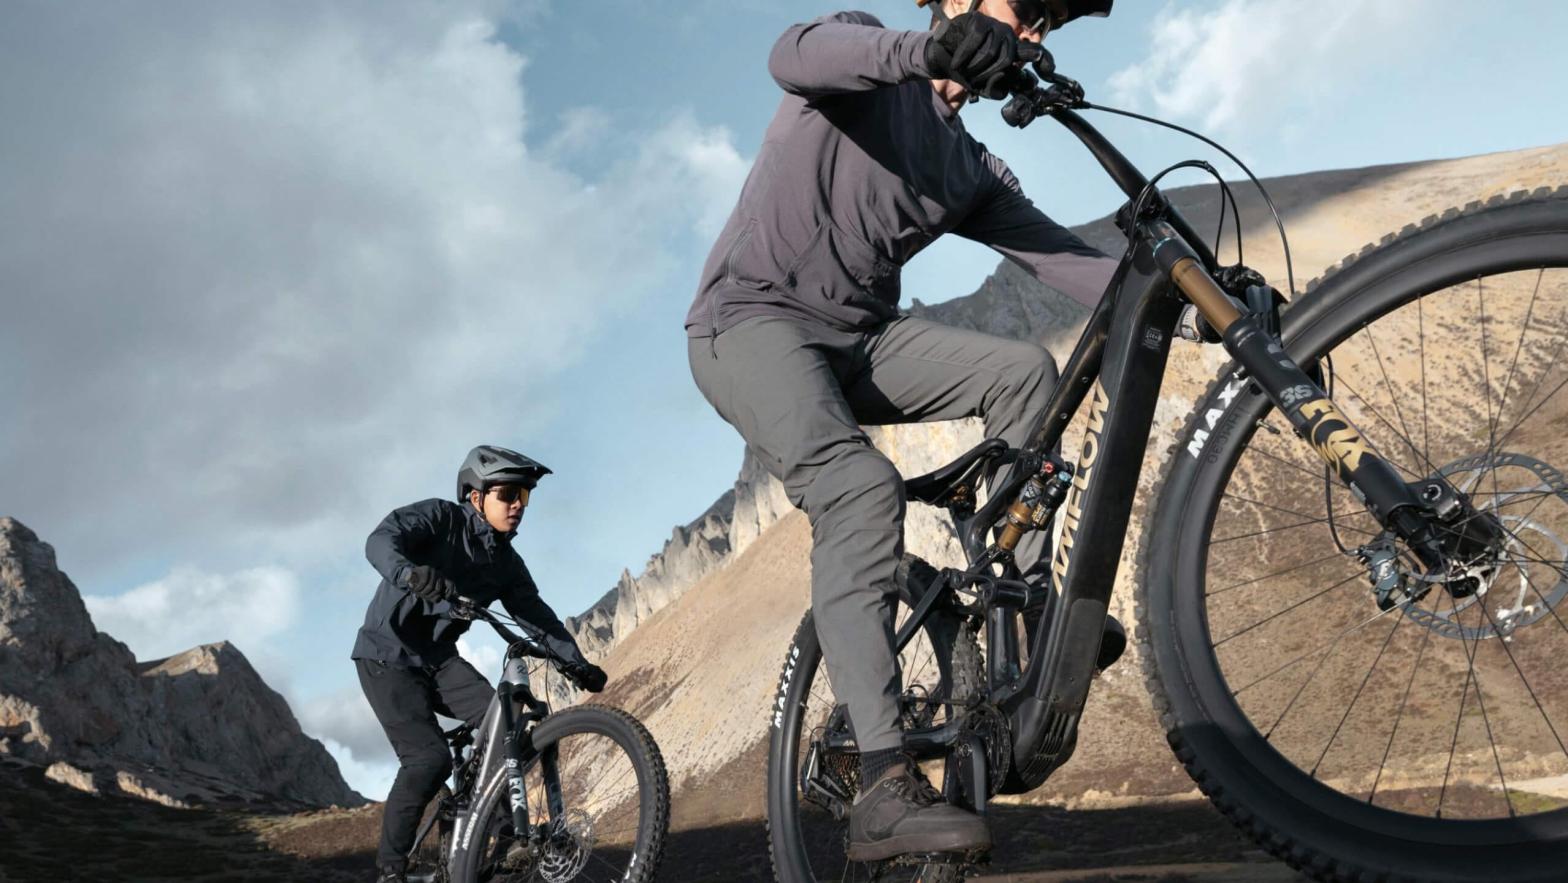 Drone Company DJI Is Making the ‘Natural Move’ to E-Bikes